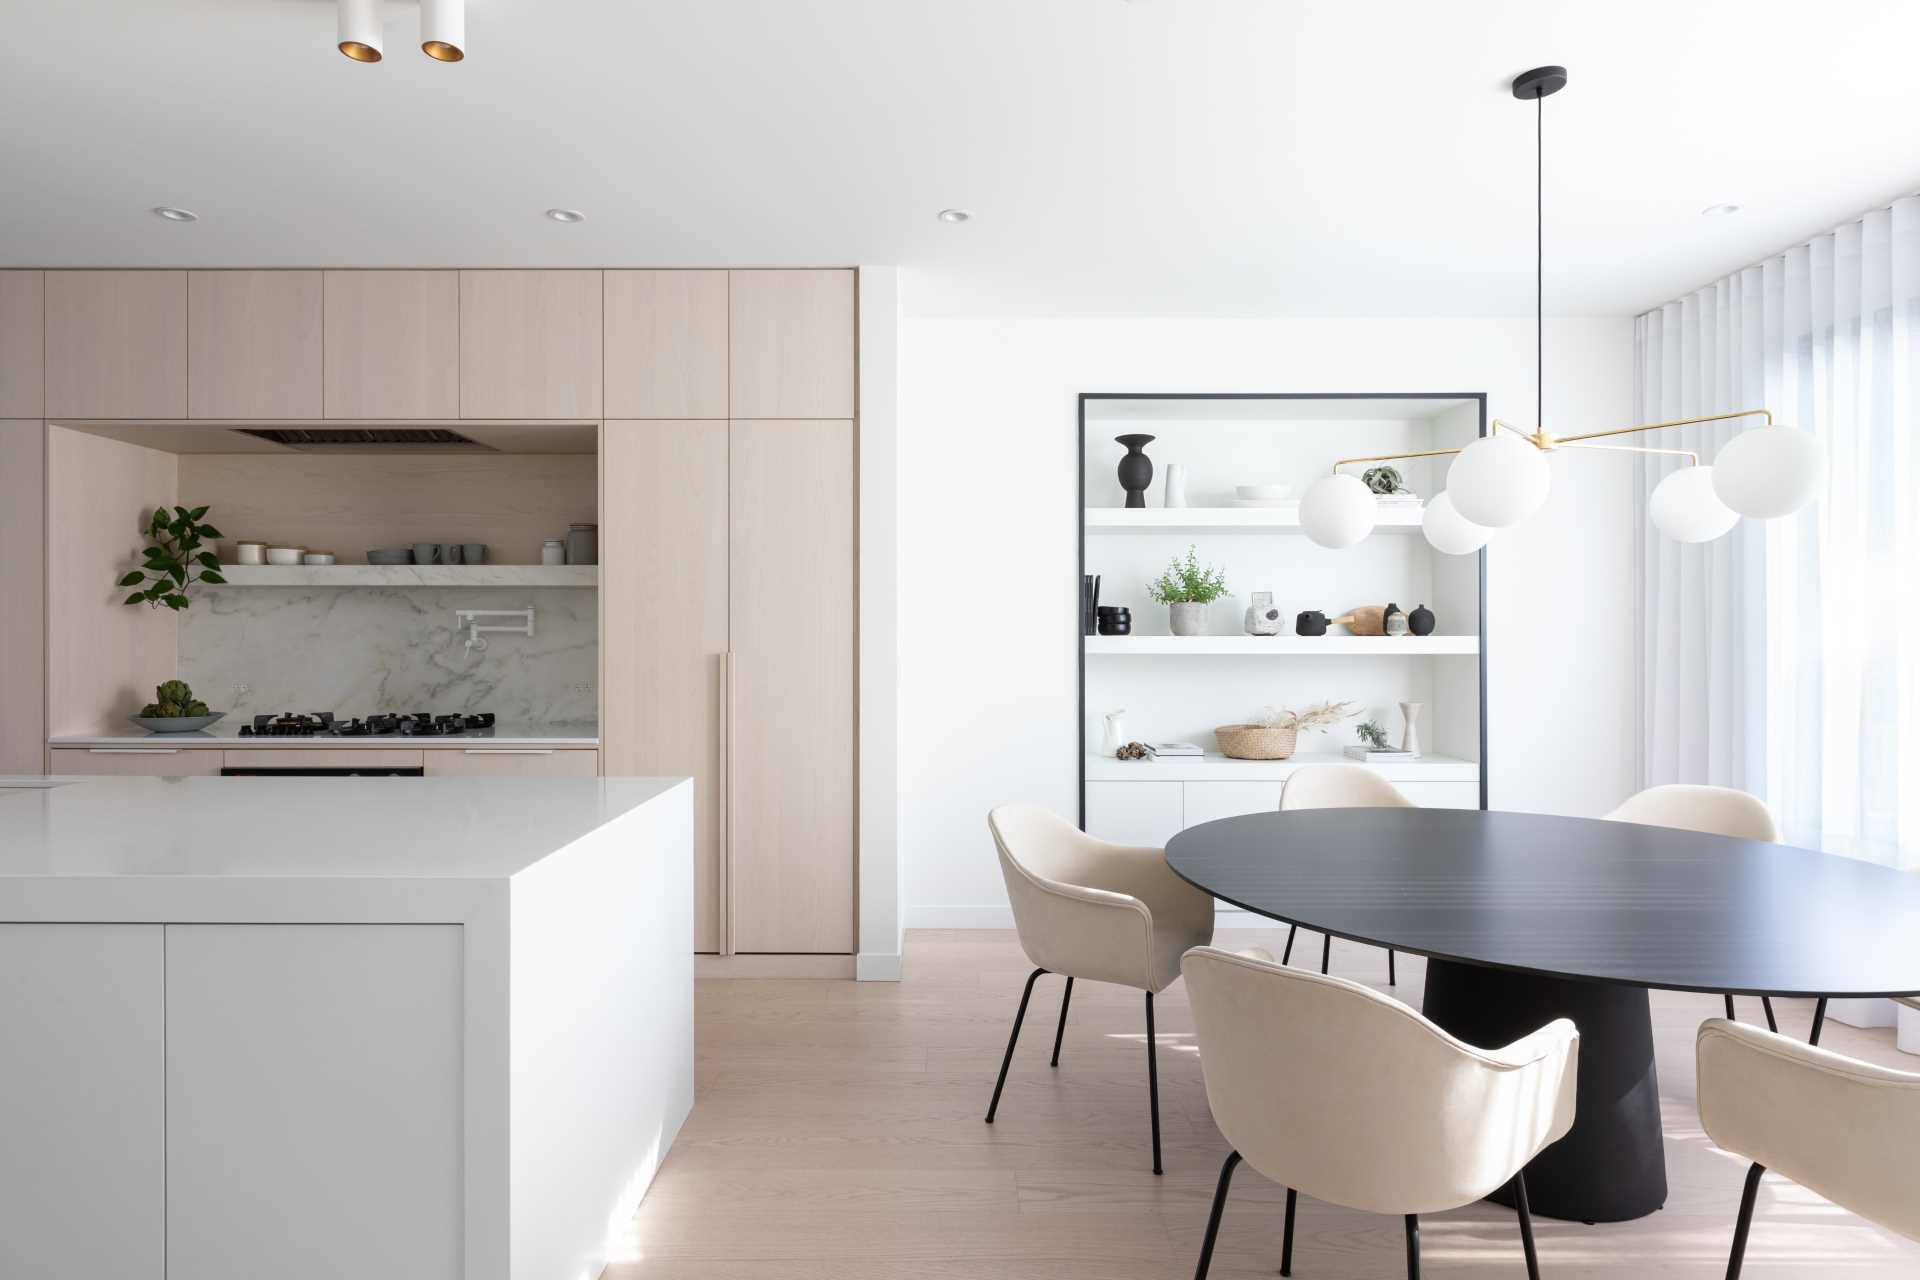 In this dining area, which is located next to the kitchen, there's a round table and a built-in display niche with black accents, which in combination with matte white shelves creates a striking display for objects.